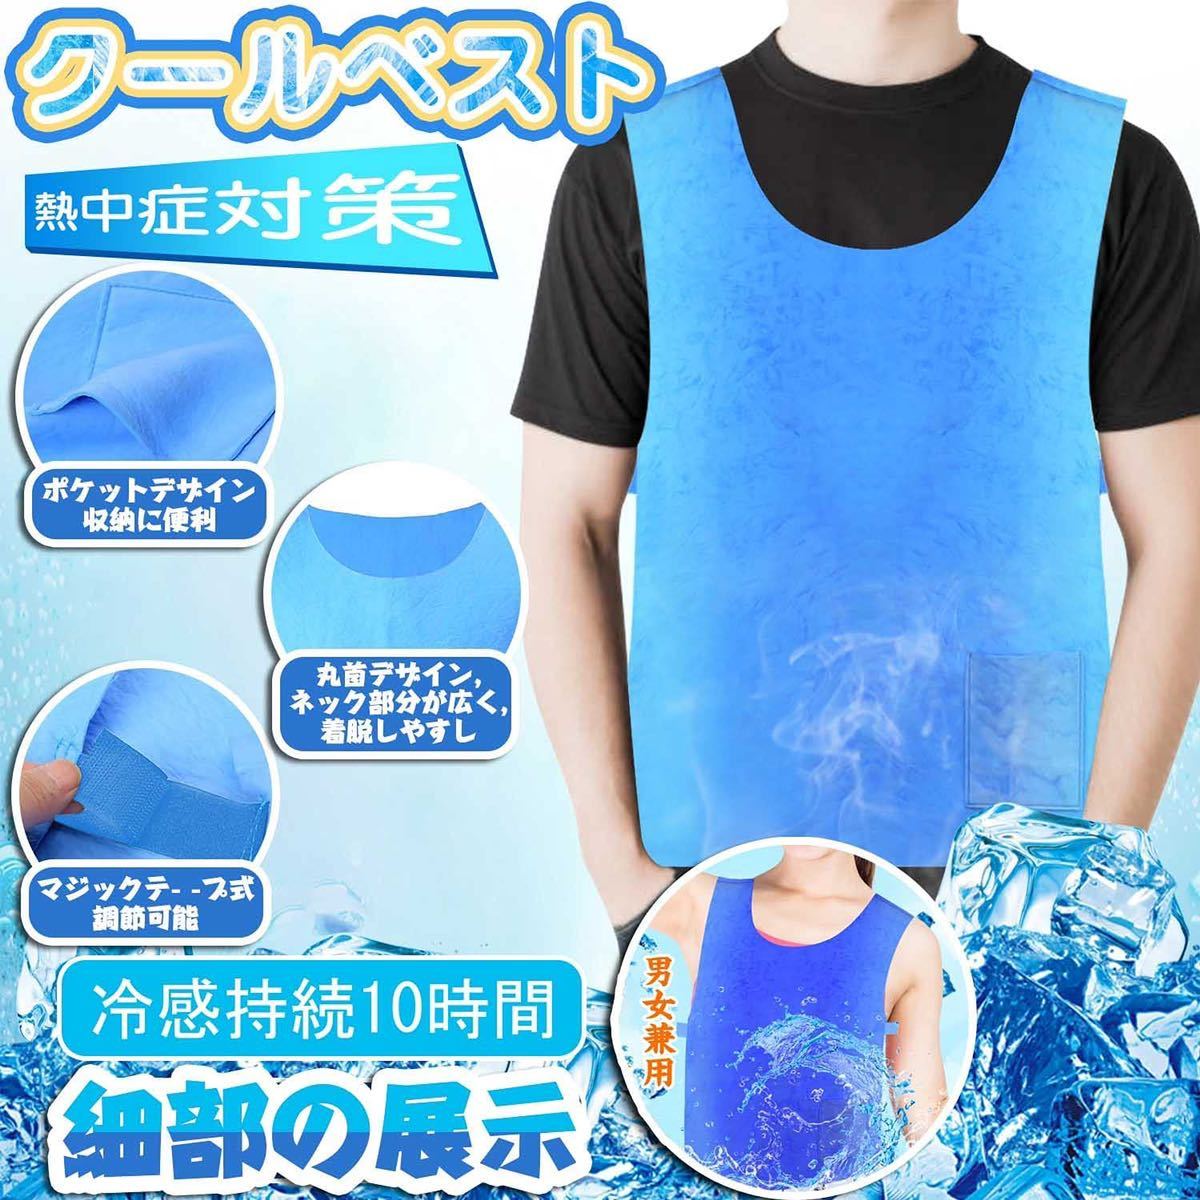  cold sensation the best cool vest cooler,air conditioner . middle .. middle . measures heat countermeasure cooling clothes keep cool 10 hour agriculture construction site sport working clothes summer 